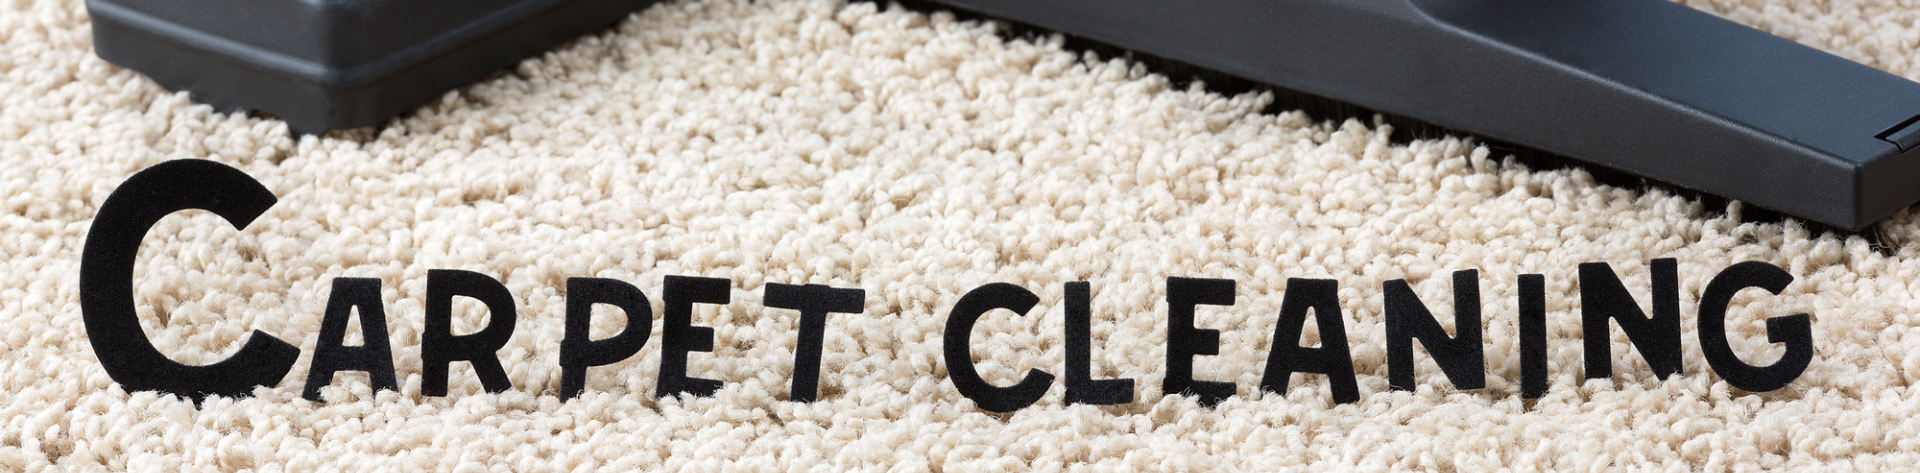 The 7 Biggest Secrets about the Carpet Cleaning Industry